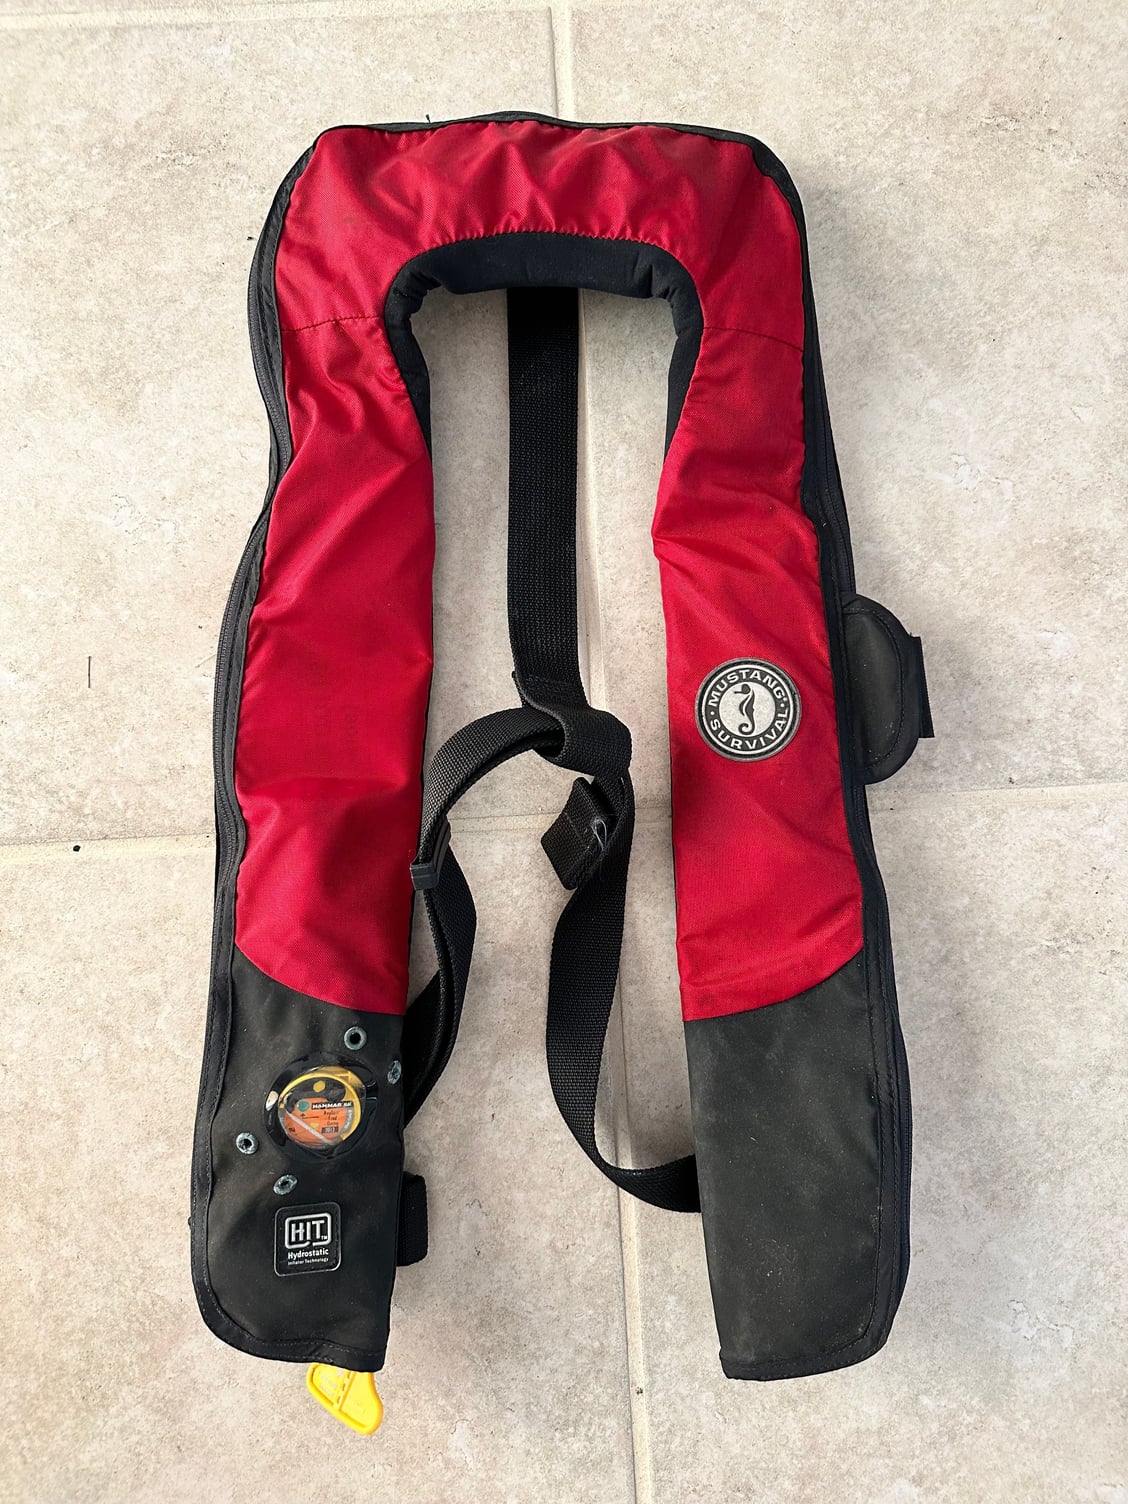 Life jackets ? - The Hull Truth - Boating and Fishing Forum